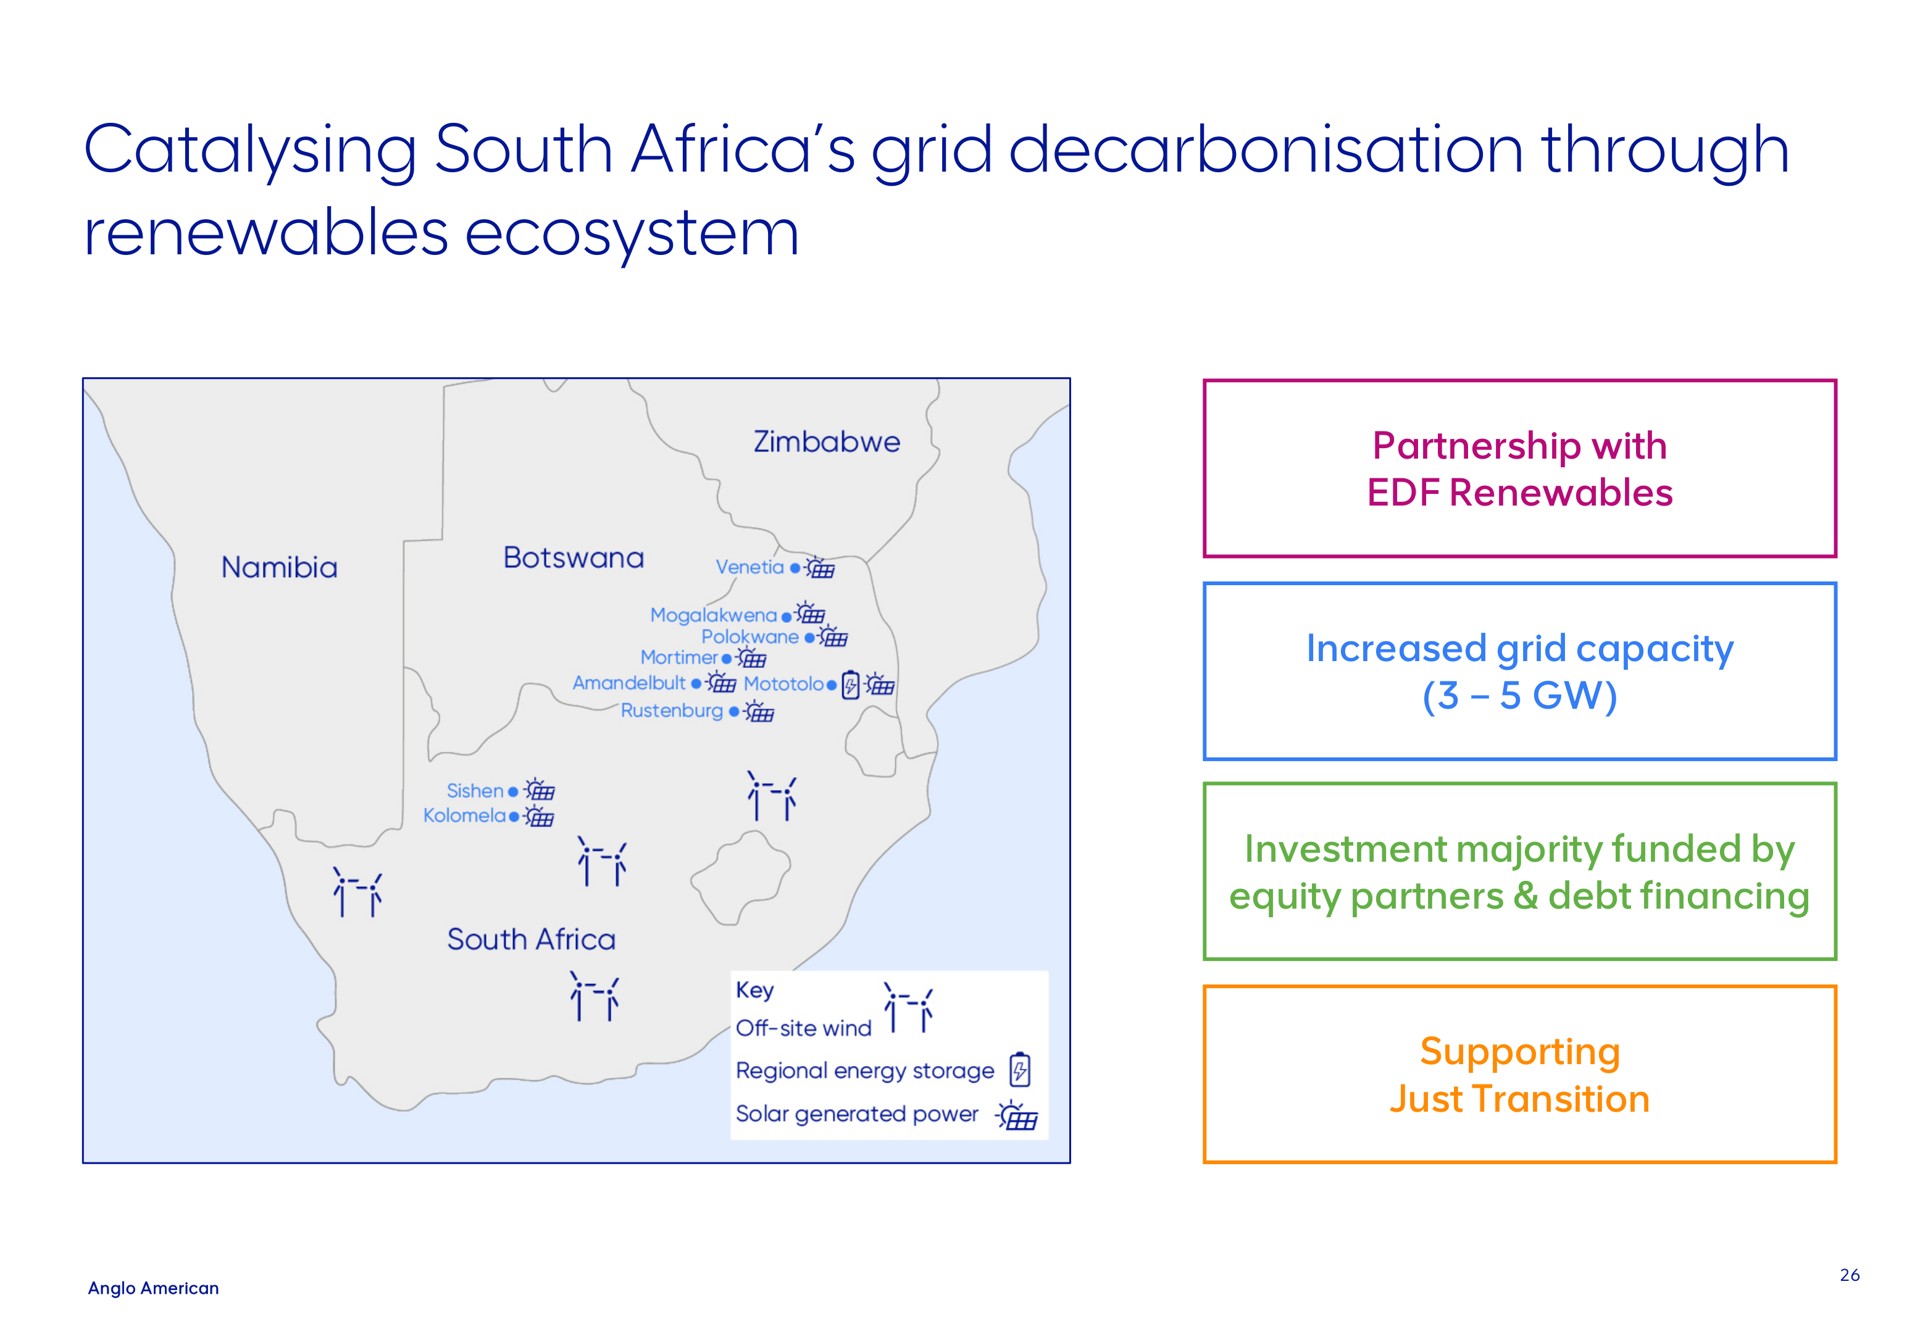 south grid through ecosystem zimbabwe a a partnership with increased capacity i just transition investment majority funded by equity partners debt financing solar generated power a regional energy storage supporting off site wind i key | AngloAmerican